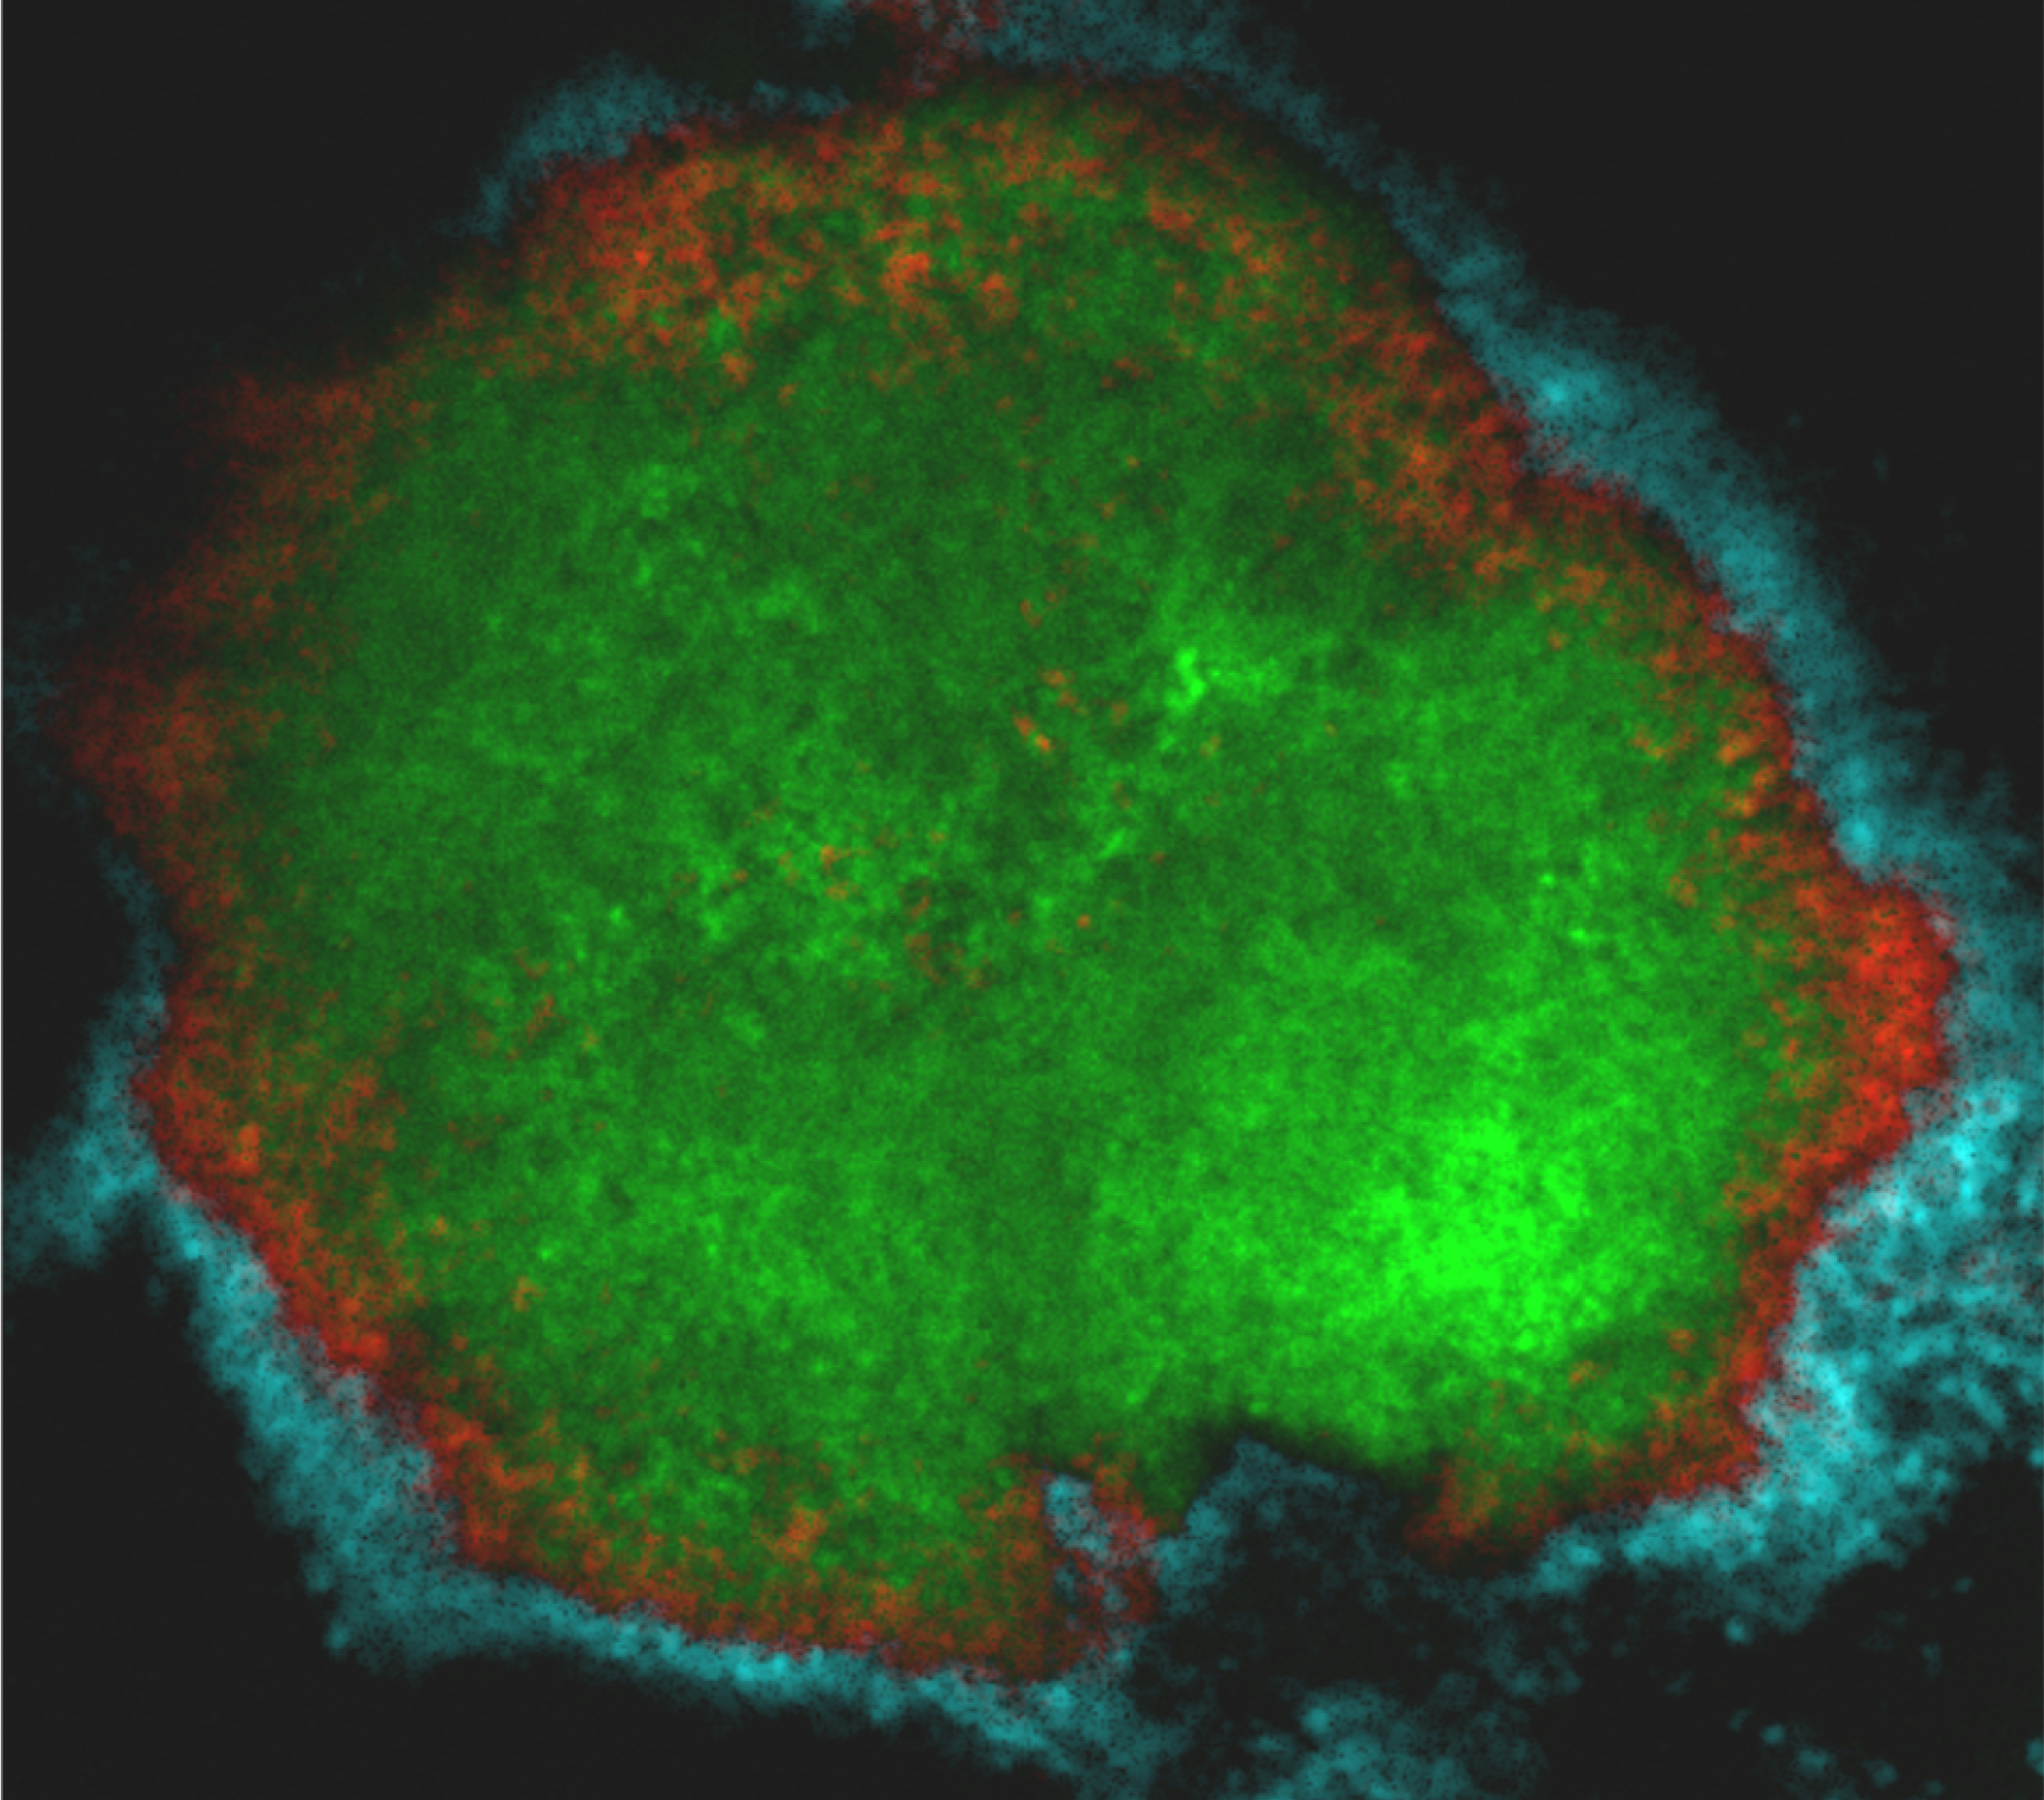 Microscopic image of a bacterial growth labeled with green, red, and blue fluorescence